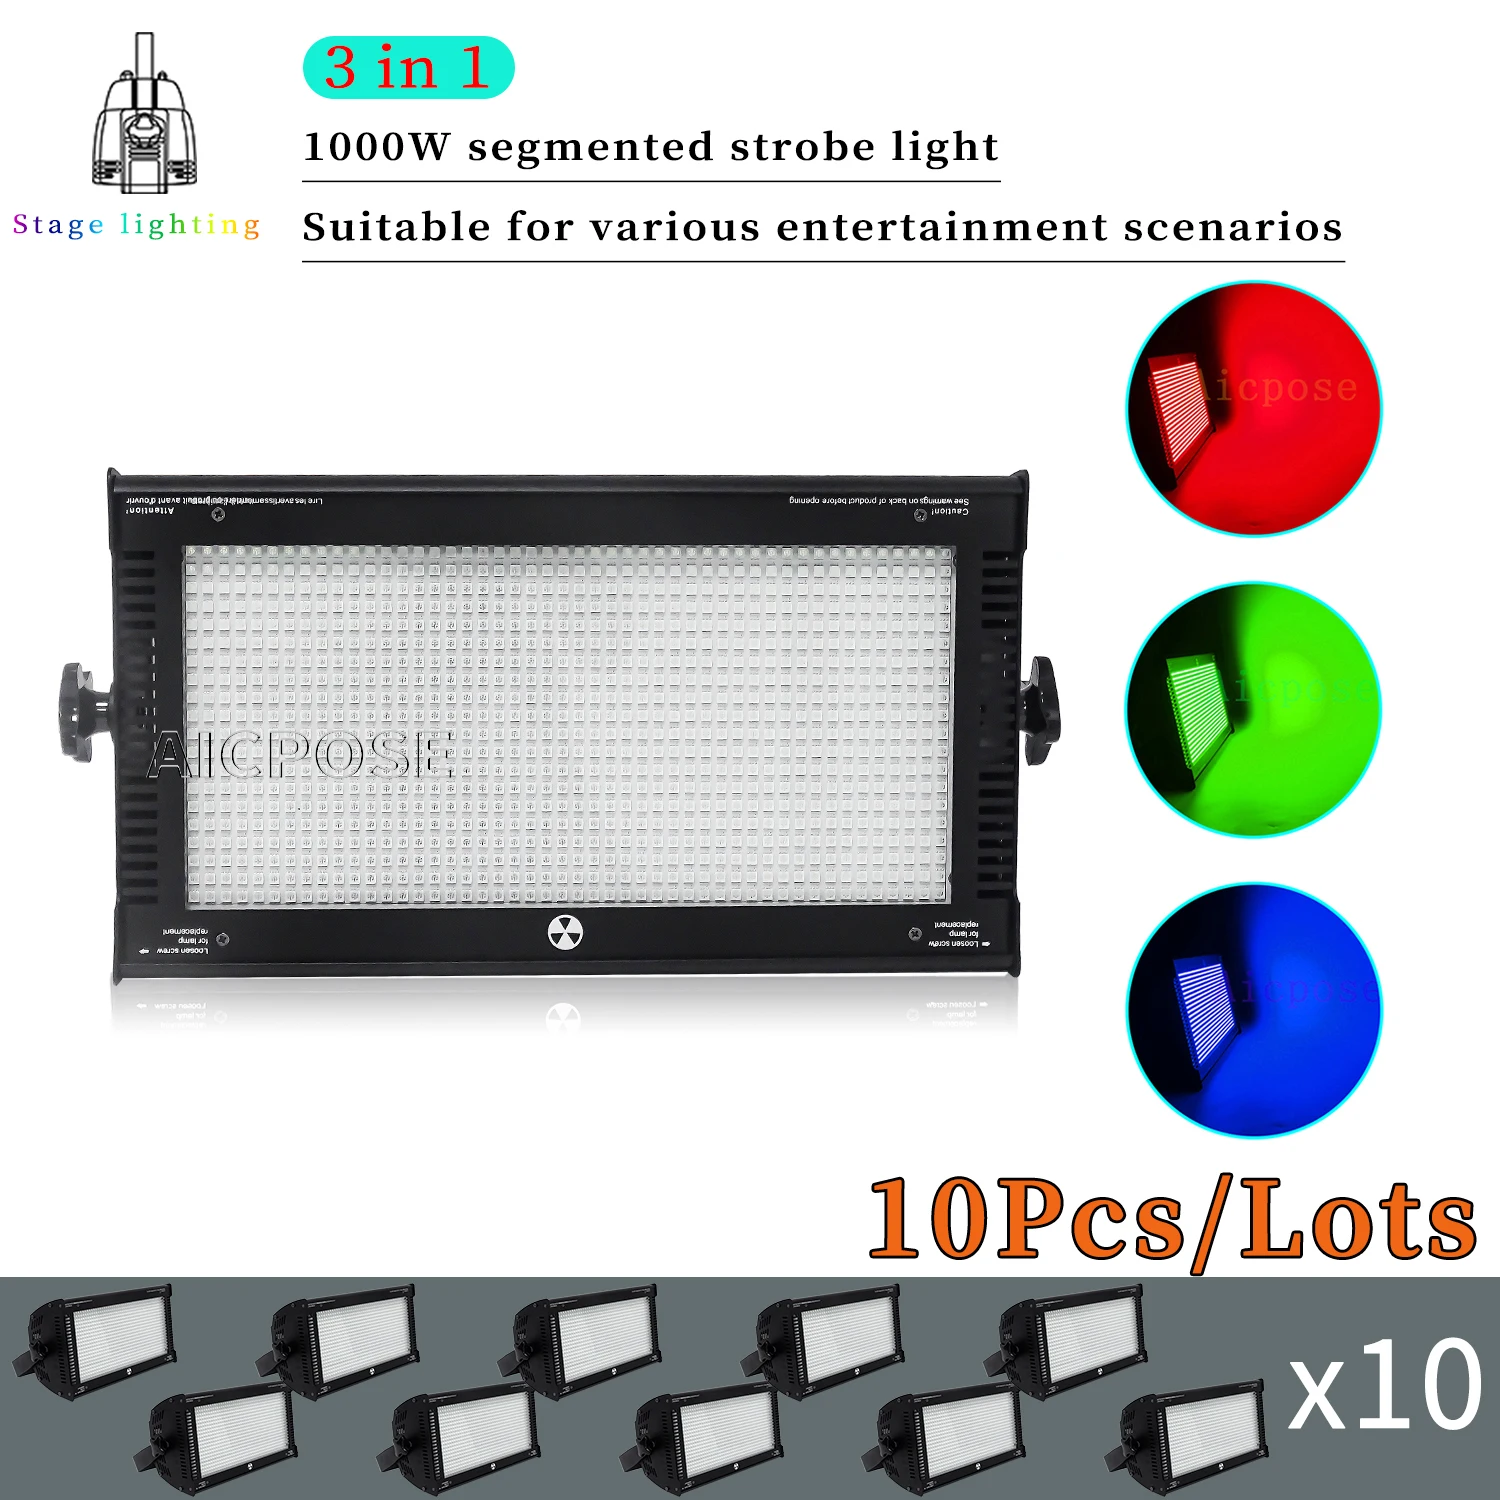 https://ae01.alicdn.com/kf/S24c3f47949d64c7498dfaf992d4e5768z/10Pcs-Lots-1000W-RGB-3-in-1-LED-Strobe-Stage-Light-8-Zones-Independent-Control-Background.jpg